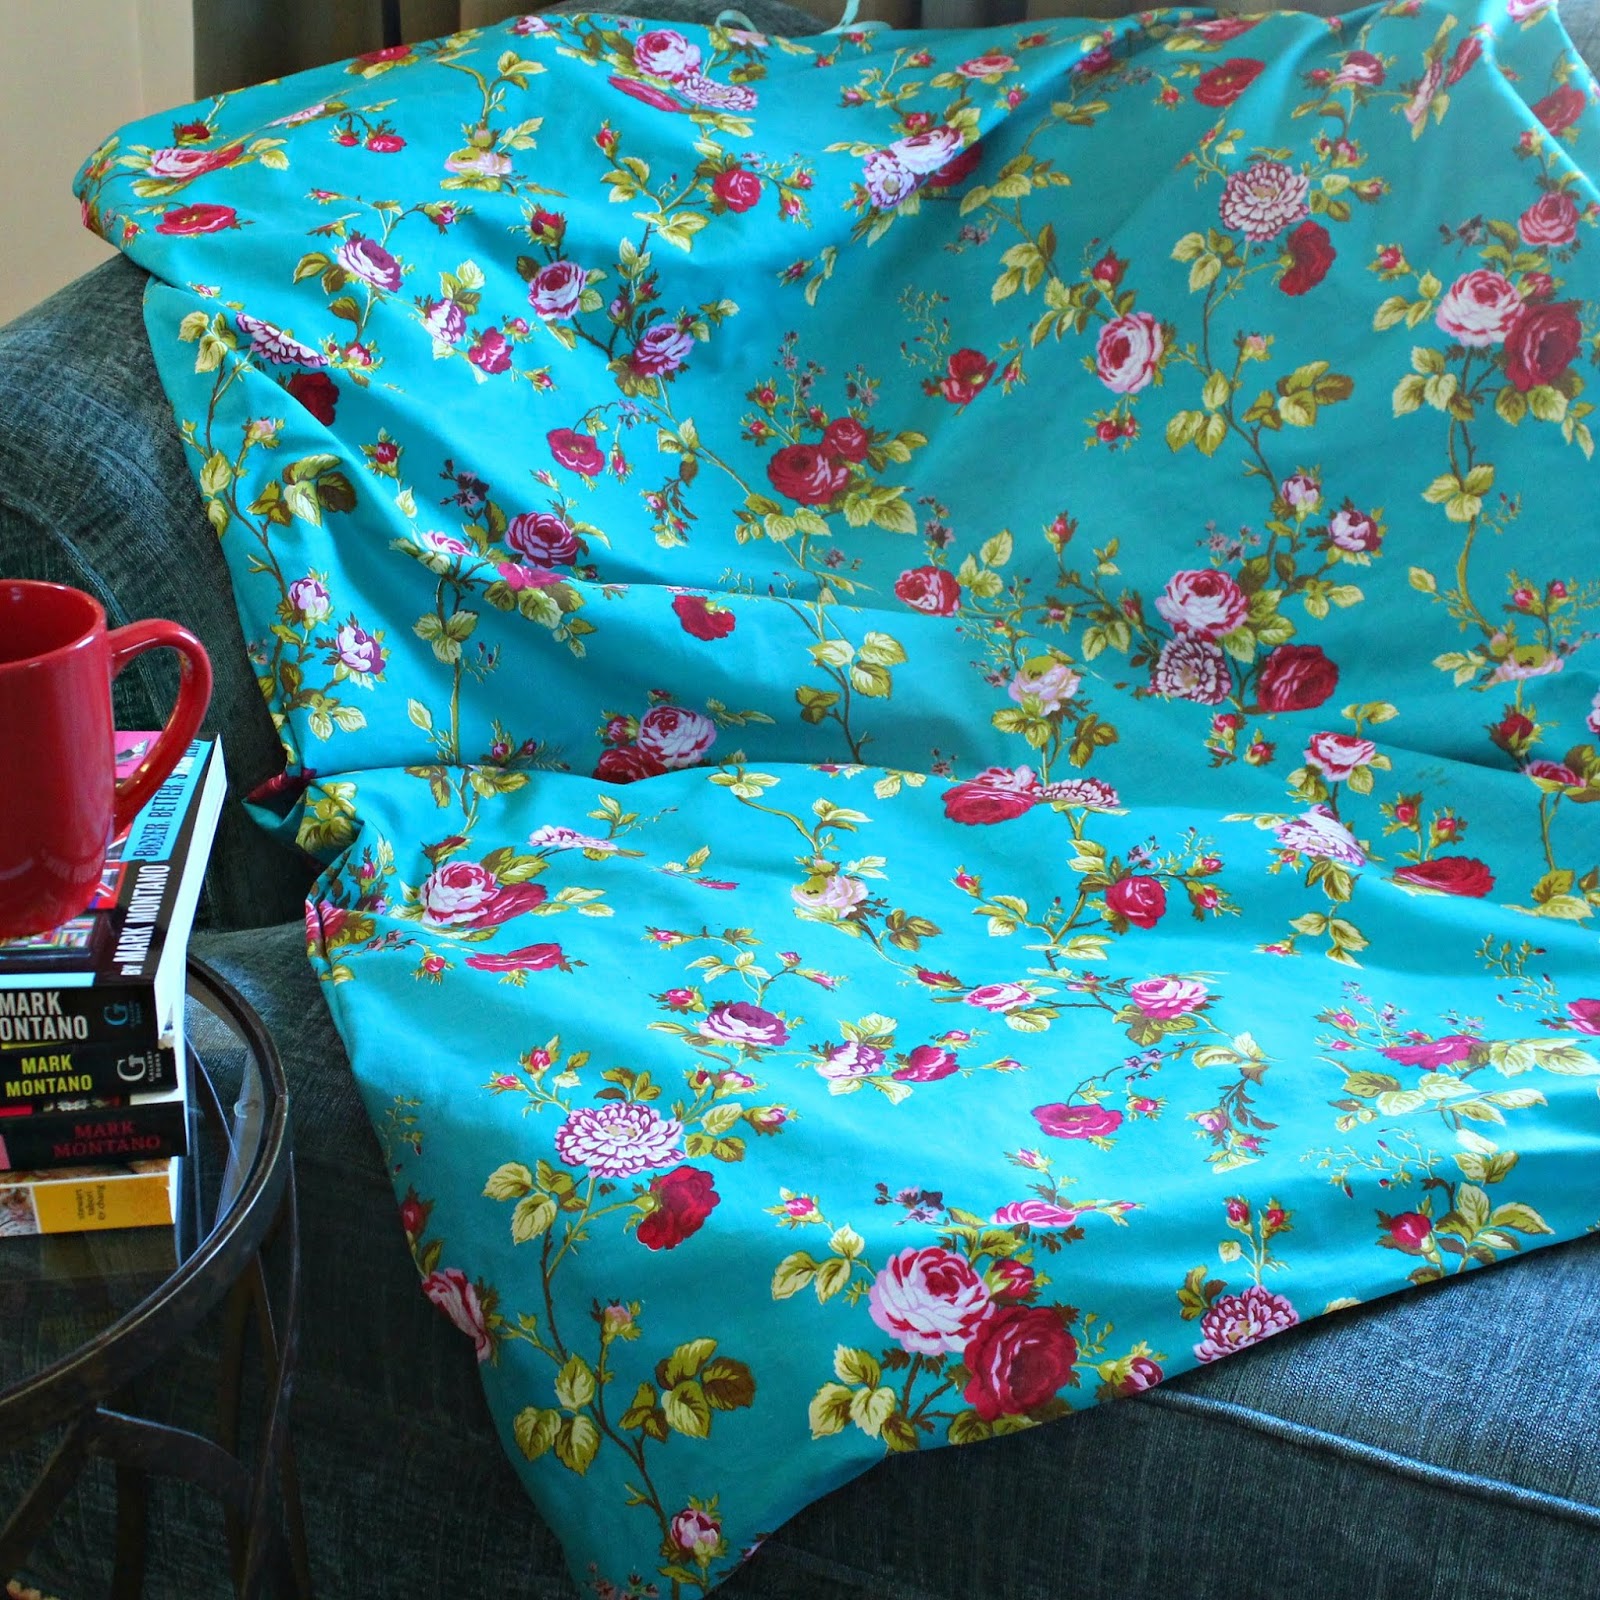 Mark Montano: No Sew Weighted Blanket DIY